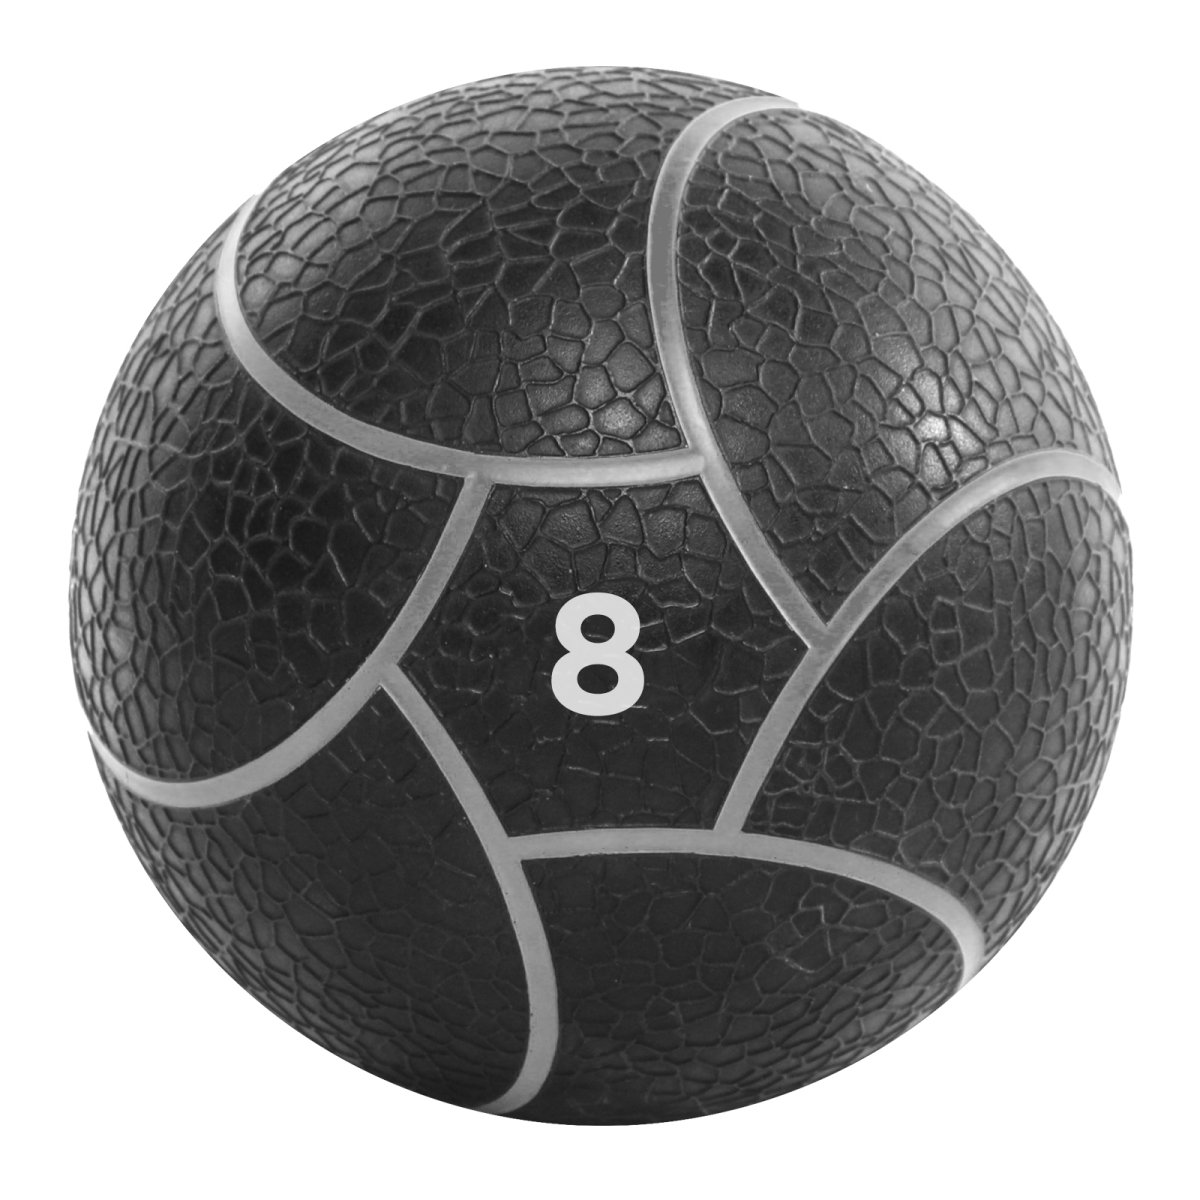 Picture of Power Systems 25708 Elite Power Med Ball Prime 8 lb. Gray